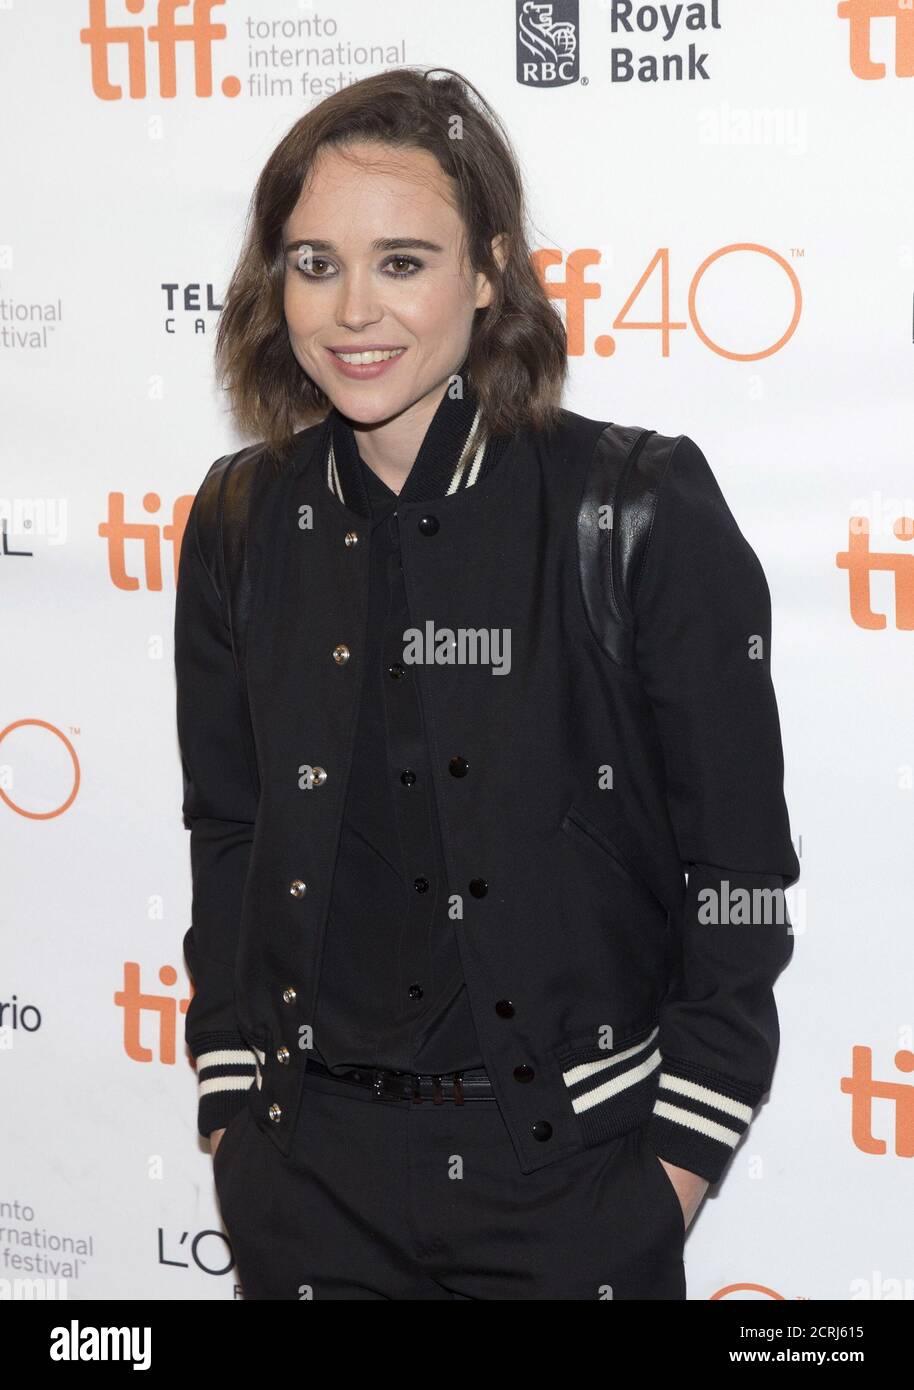 Ellen Page arrives on the red carpet for the film 'Into the Forest' during the 40th Toronto International Film Festival in Toronto, Canada, September 12, 2015.  REUTERS/Mark Blinch Stock Photo